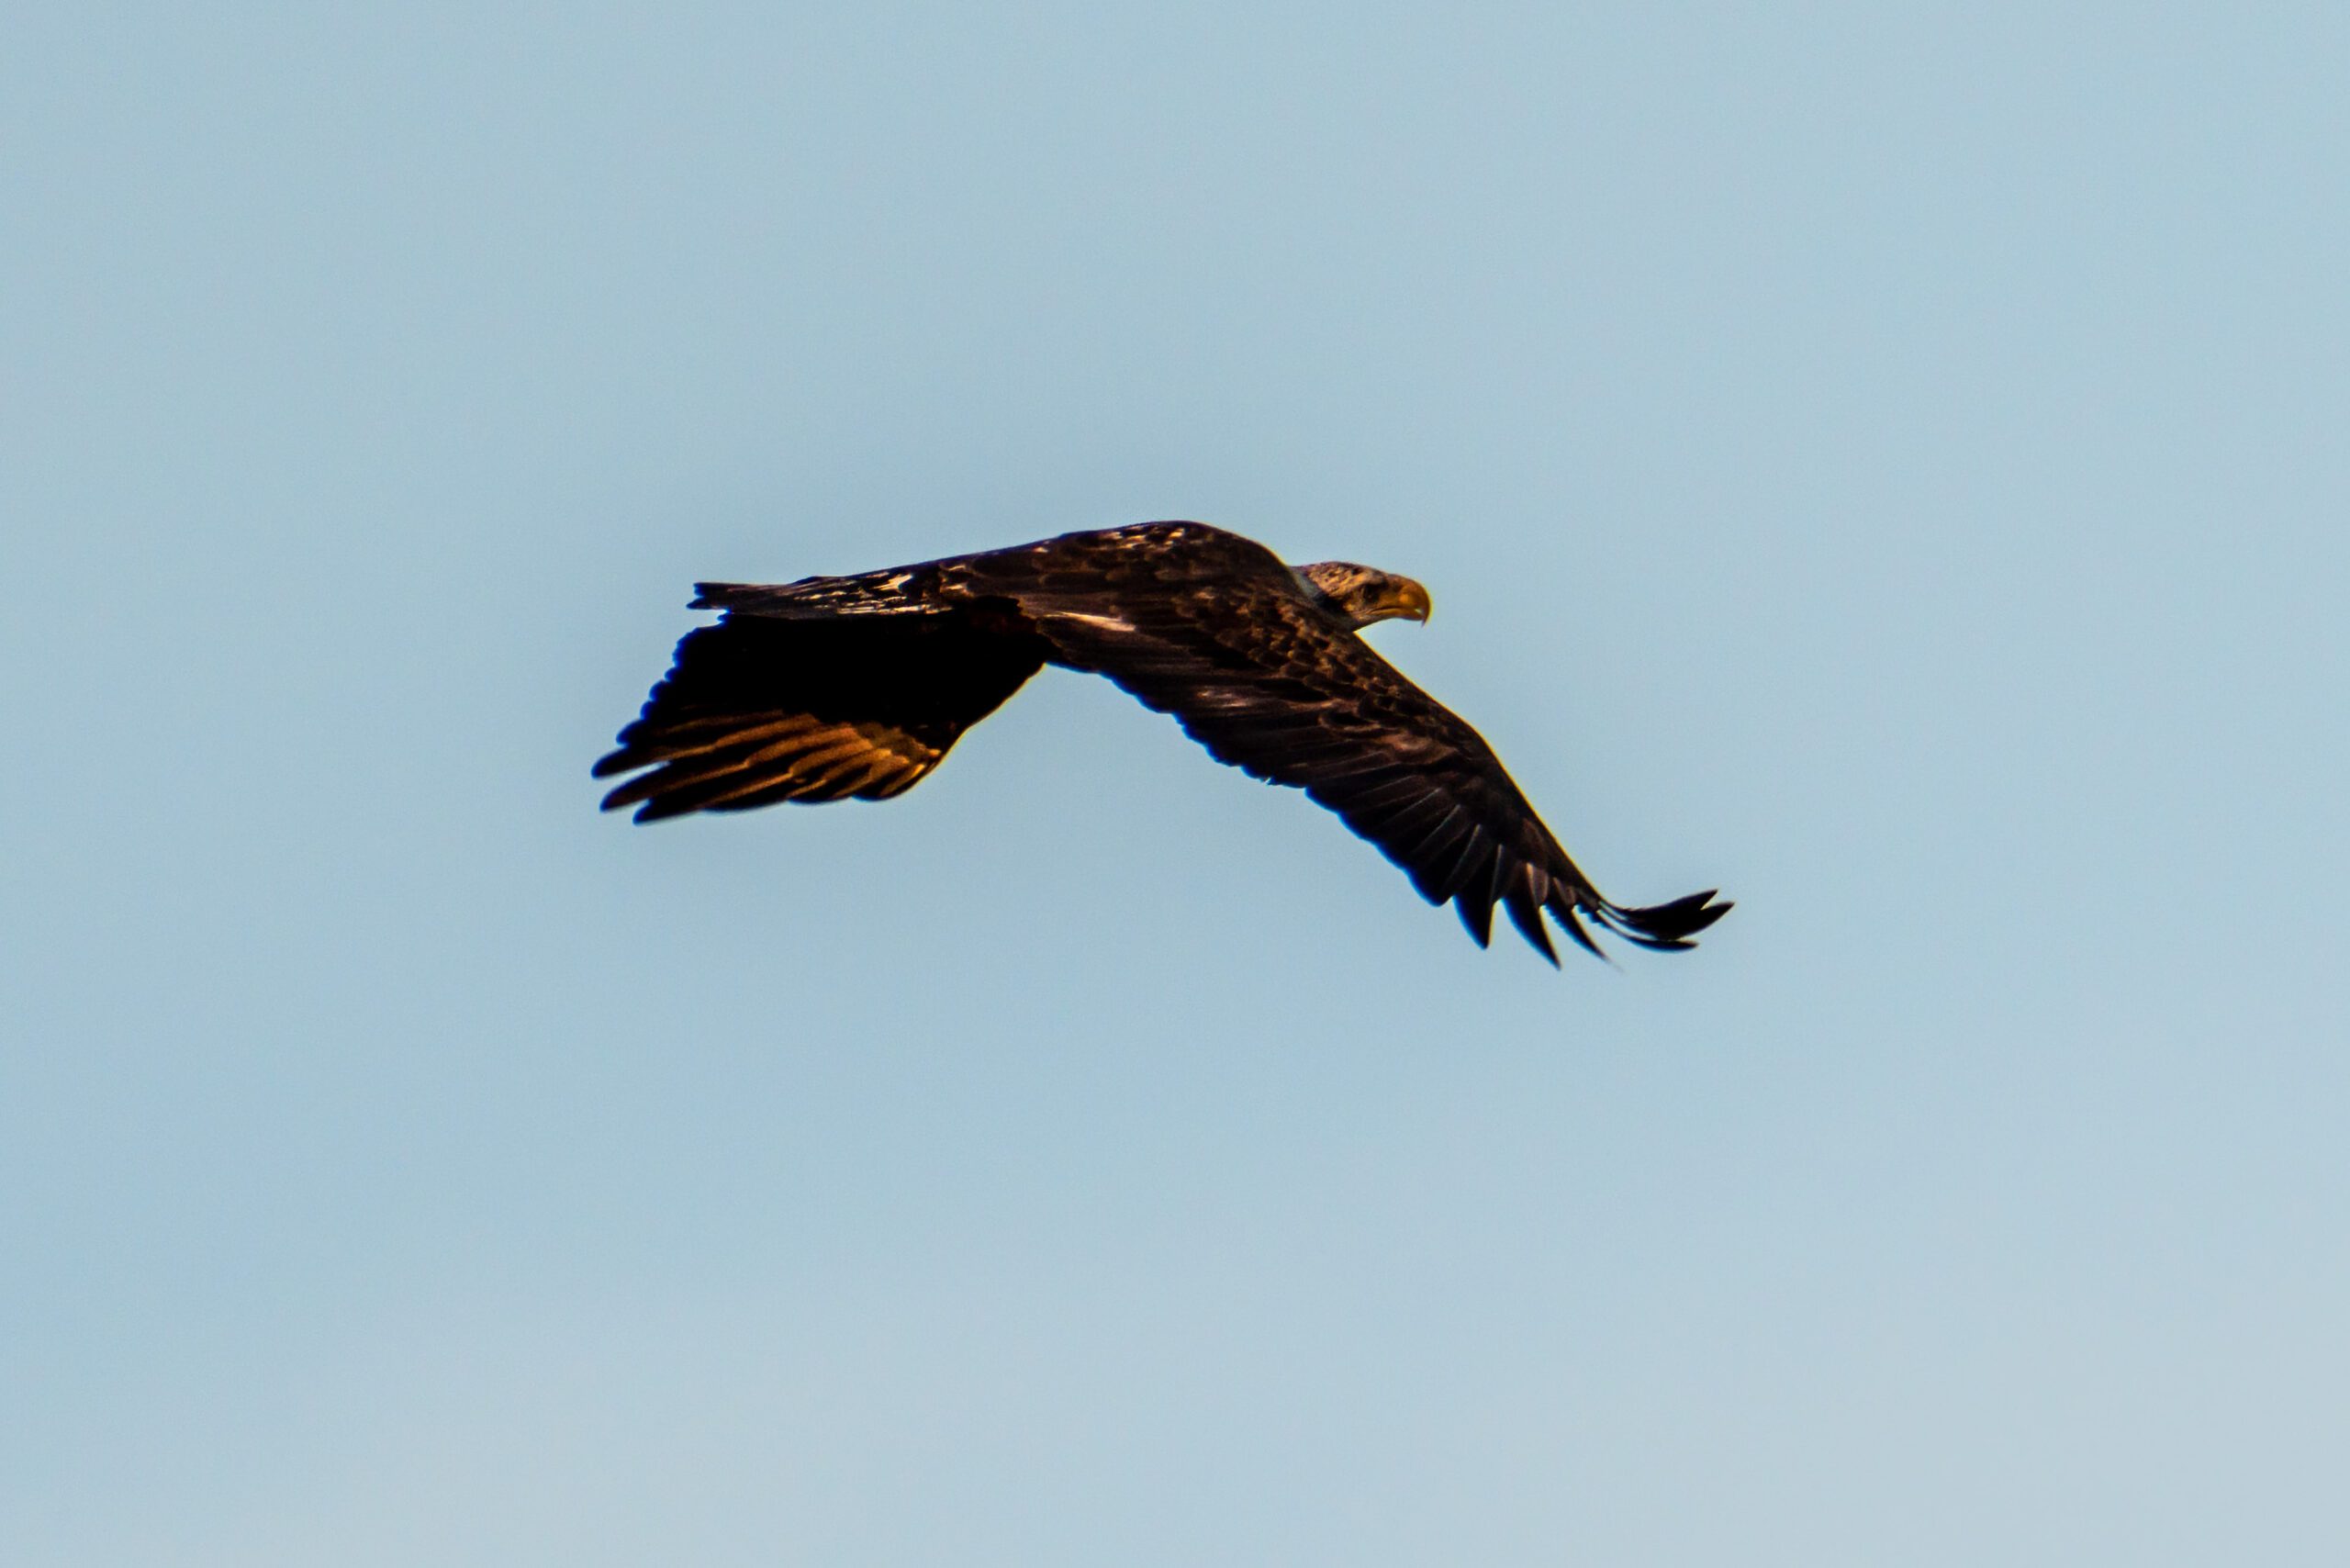 Bald eagle flying over Canaveral National Seashore during a guided kayaking tour. These birds of prey are some of the largest raptors we see in the National Park.